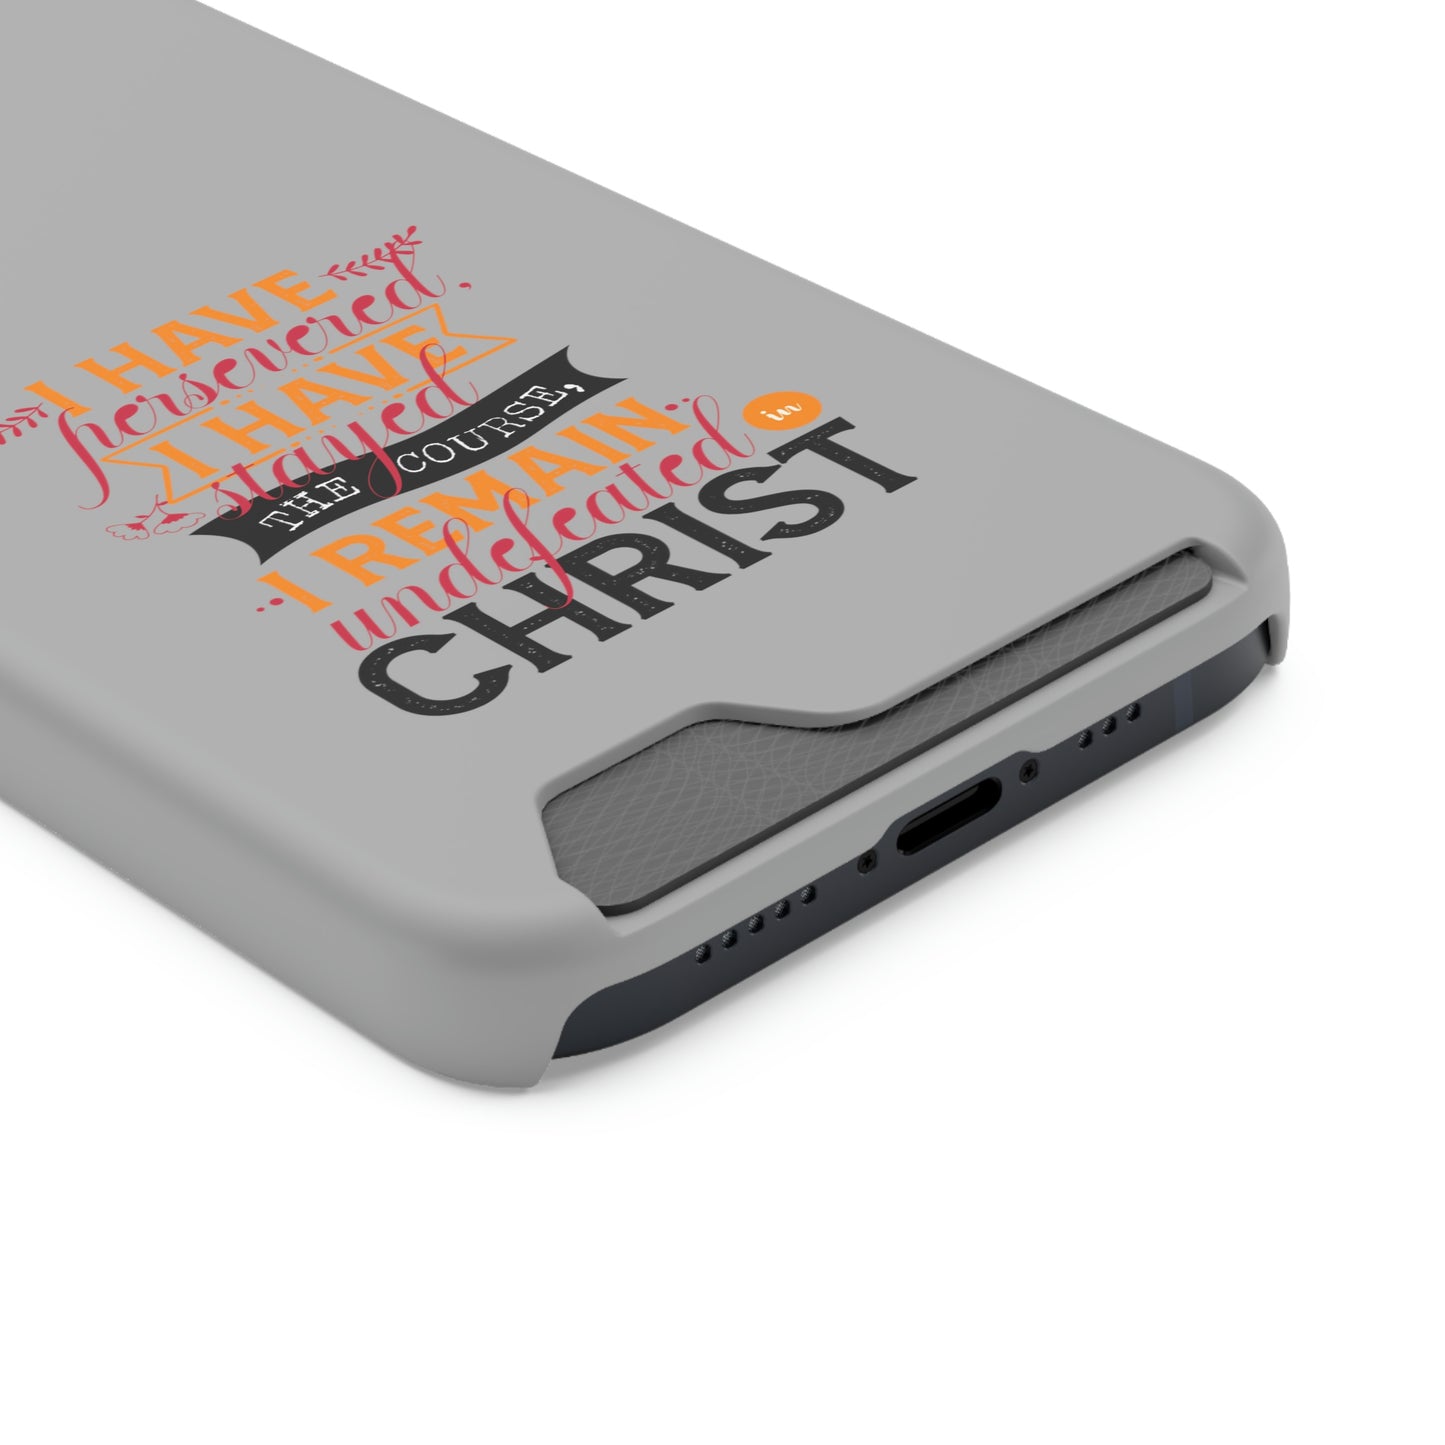 I Have Persevered I Have Stayed The Course I Remain Undefeated In Christ Phone Case With Card Holder